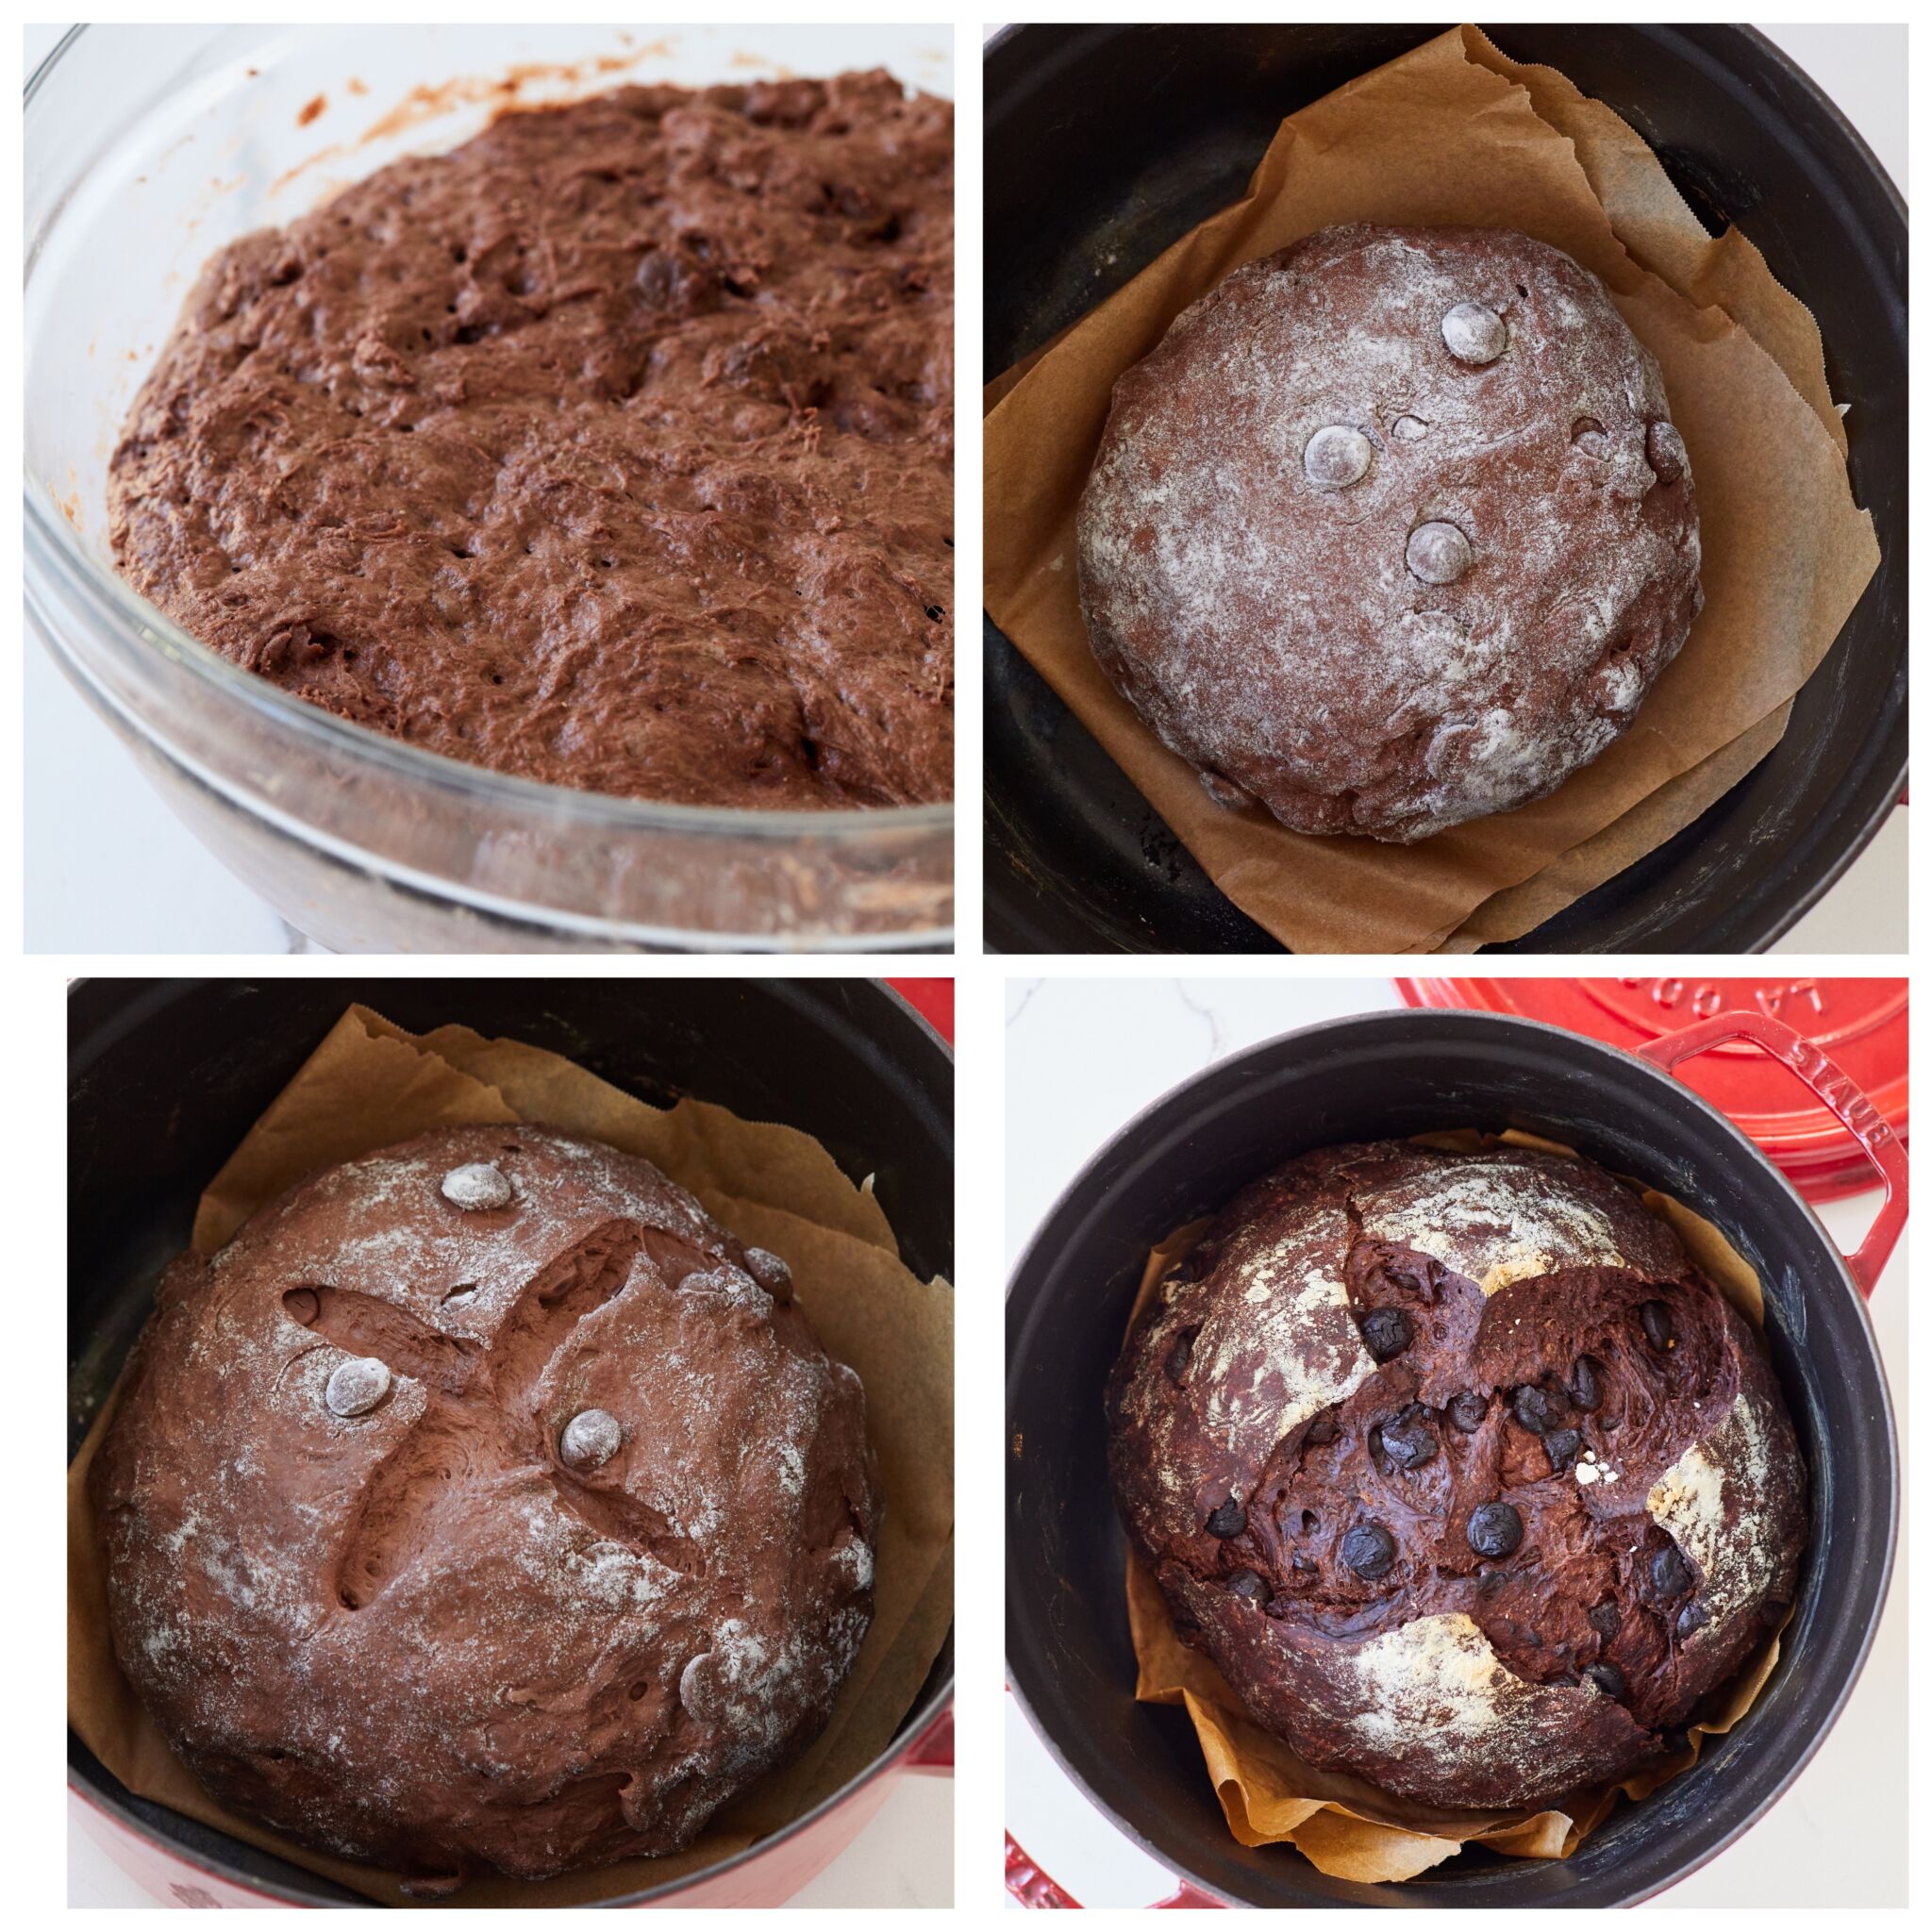 Step-by-step instructions on how to make No-Knead Chocolate Bread: Bulk ferment the dough in a glass bowl until it's bubbly. Shape and final proof the dough in the dutch oven until it's doubled in size. Score the top before baking. Bake until it's firm to touch, has a rich chocolate aroma, slightly pulled away from the edge and sounded hollow when tapped at the bottom.